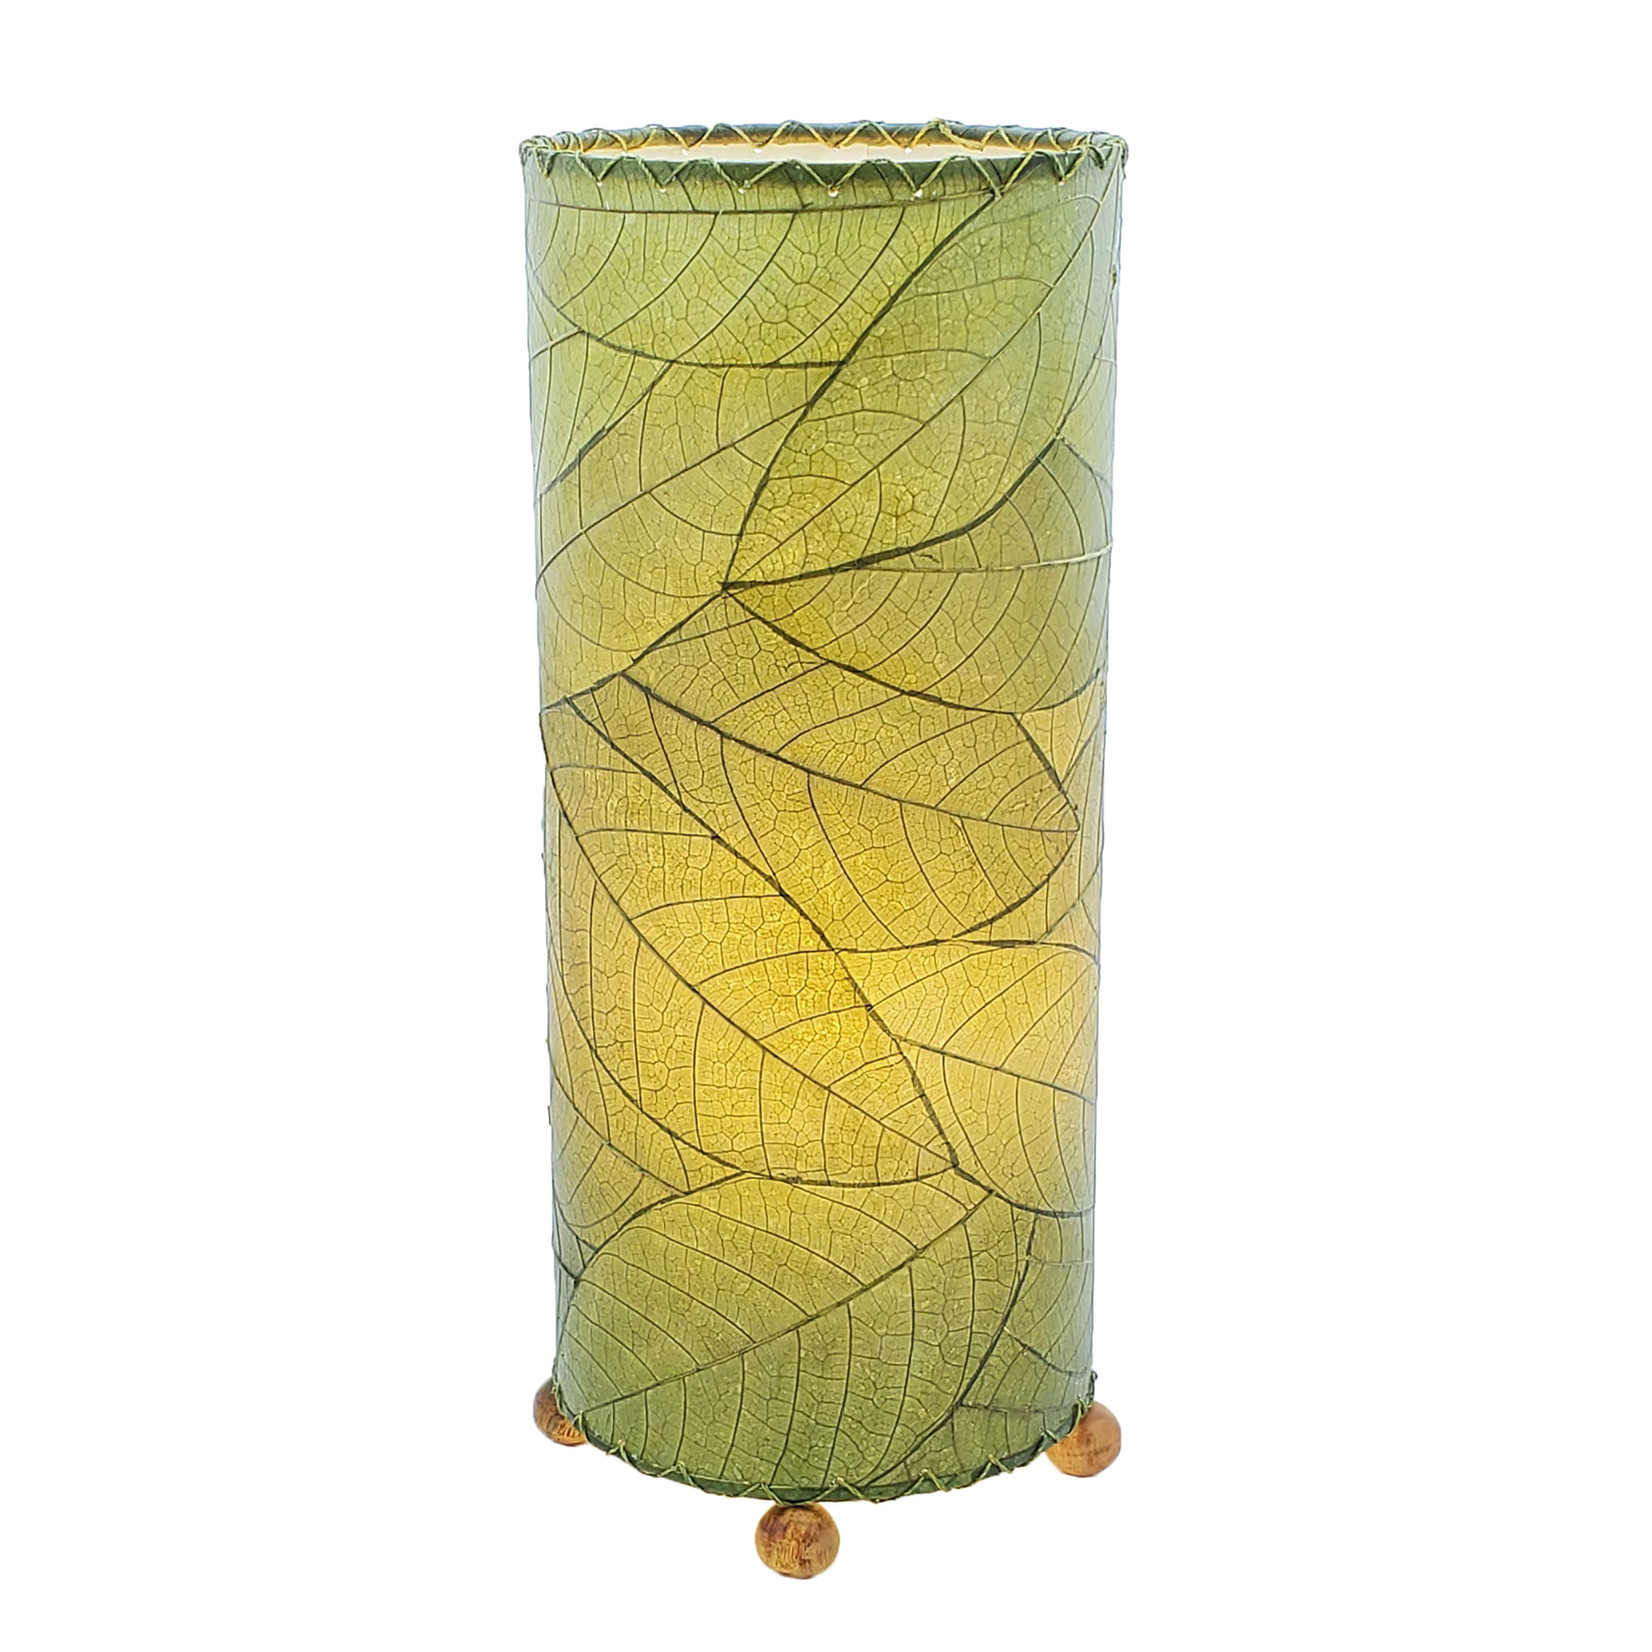 Eangee Home Design Lamp, EANGEE, Cocoa Leaf Cylinder, 17x7", green